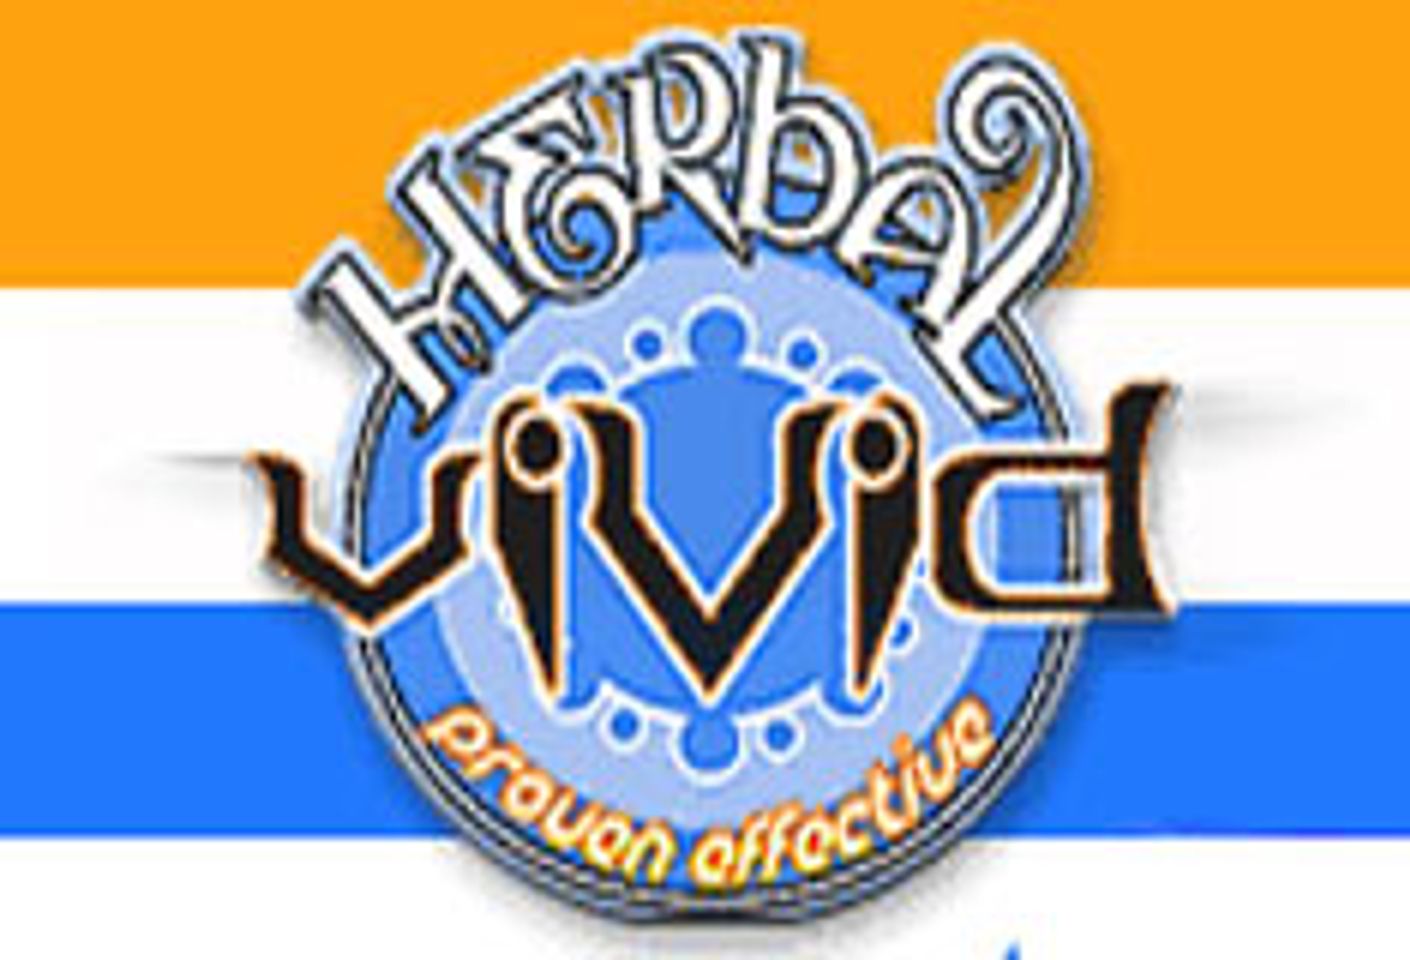 Herbal-O, Paradise To Distribute Vivid-Brand Products